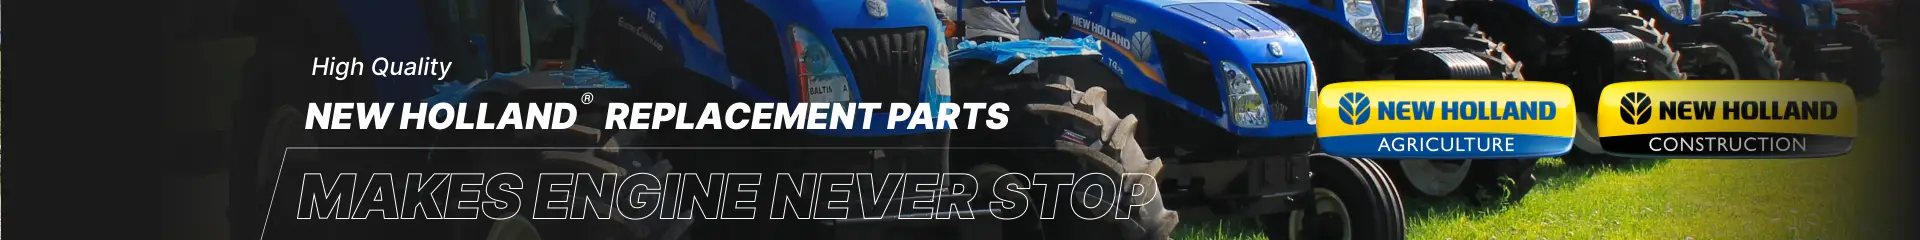 Aftermarket New Holland Parts for Sale